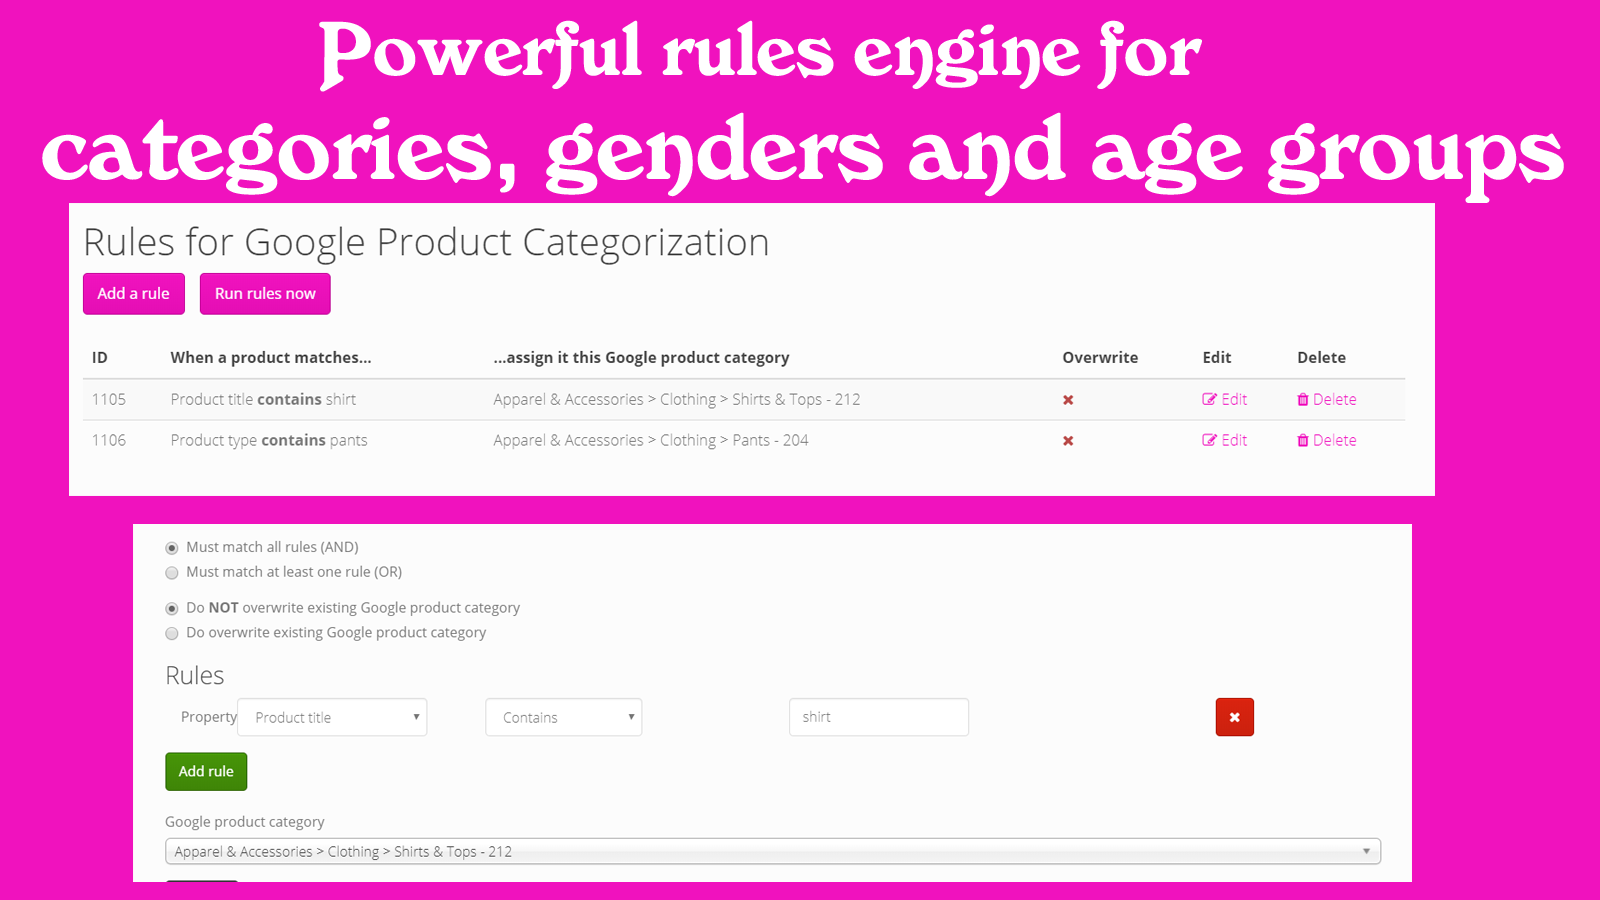 Powerful rules engine for categories, age groups and genders